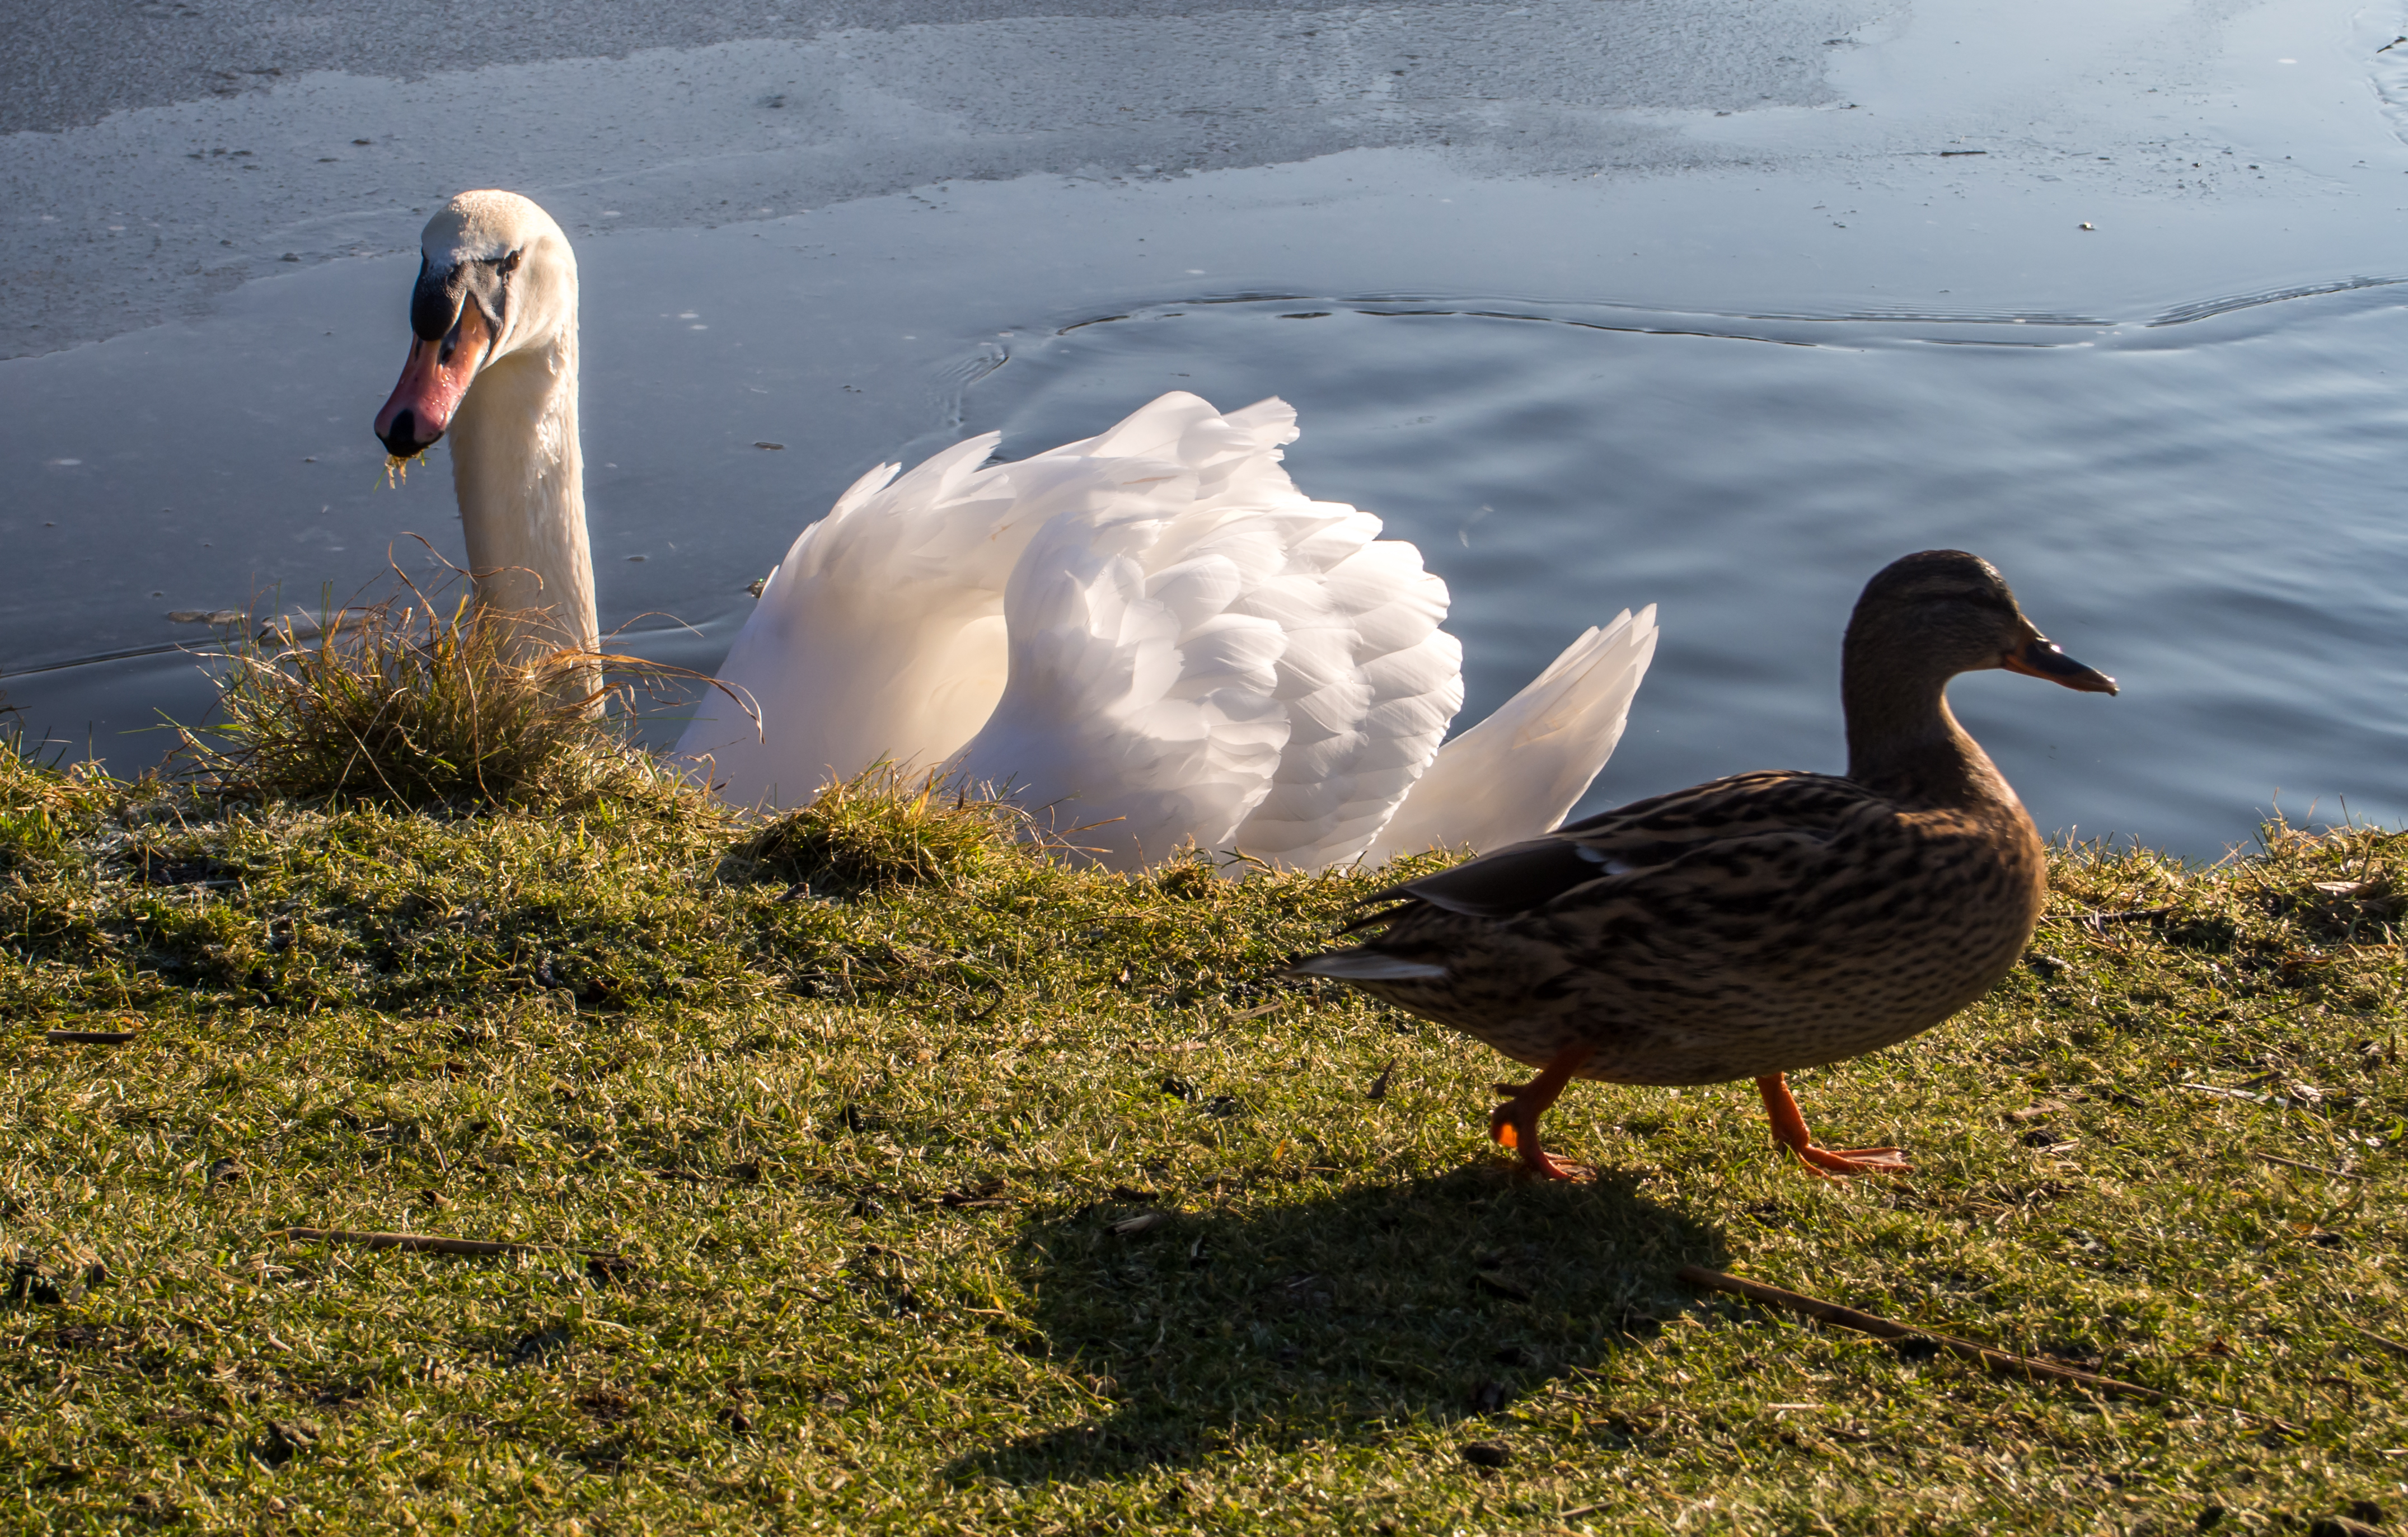 white swan and duck, Animals, Sunlight, Nature, Outdoors, HQ Photo